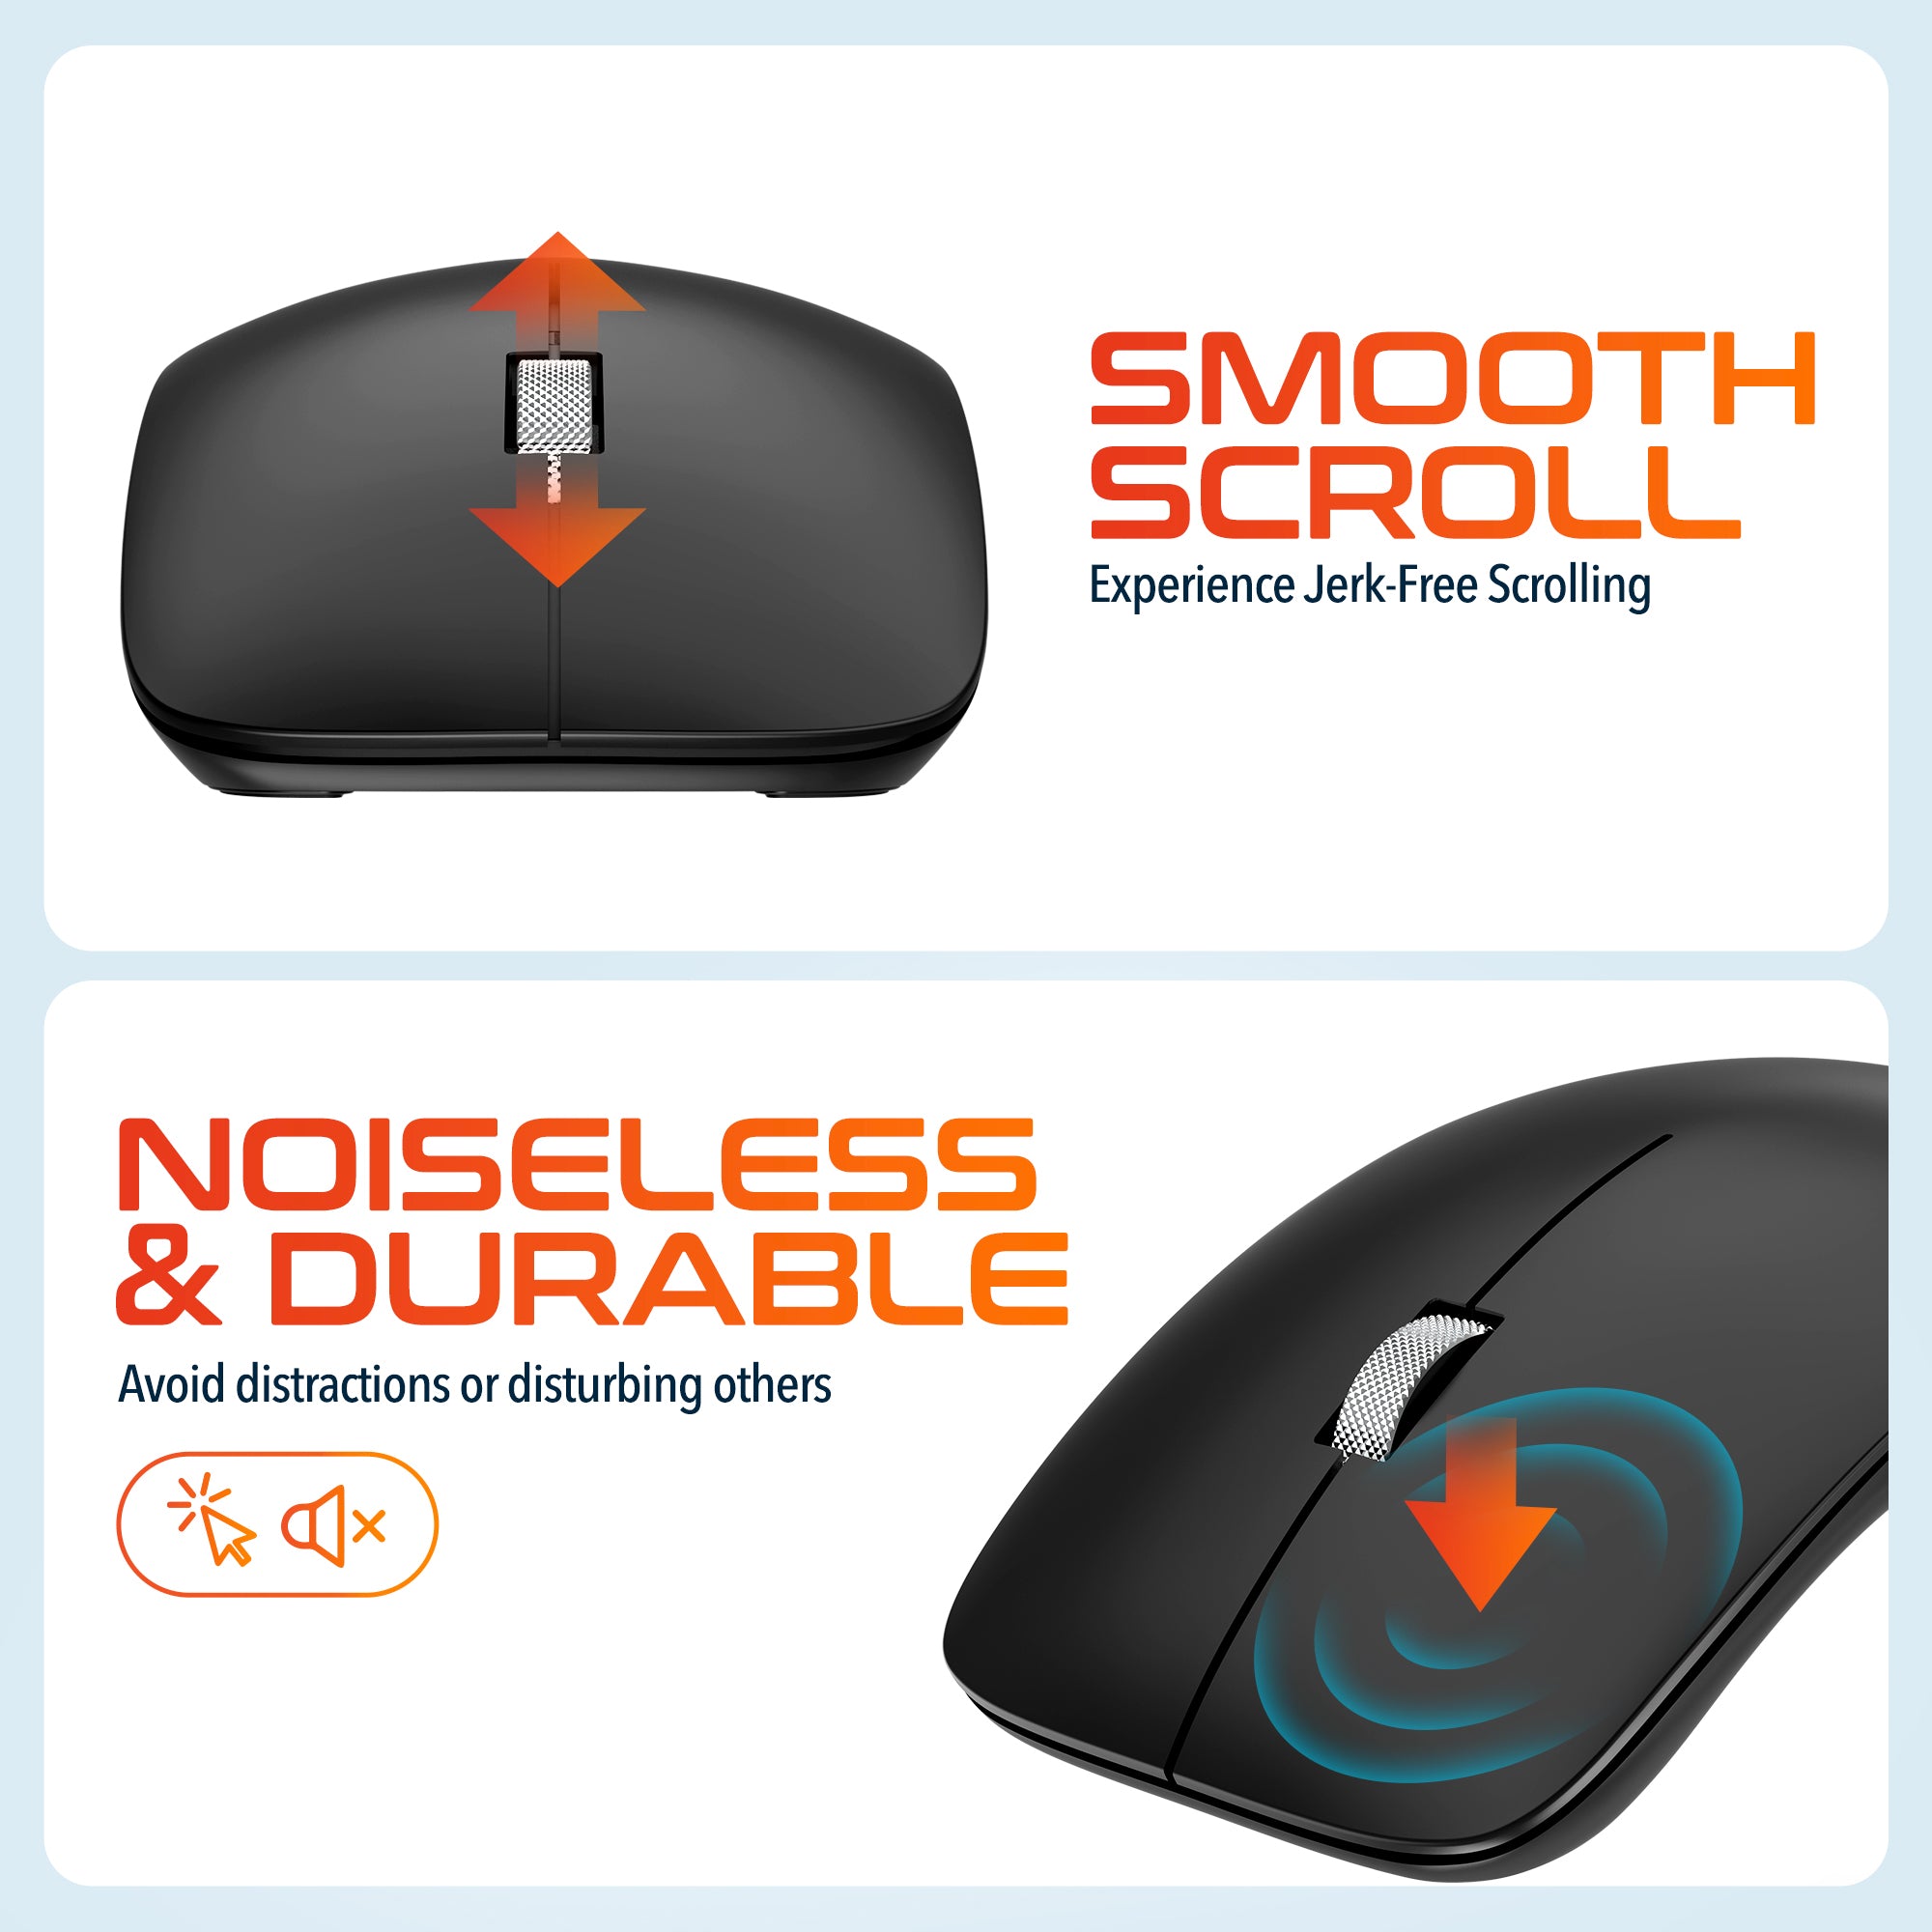 Delton S10 Curved Wireless Ergonomic Mouse